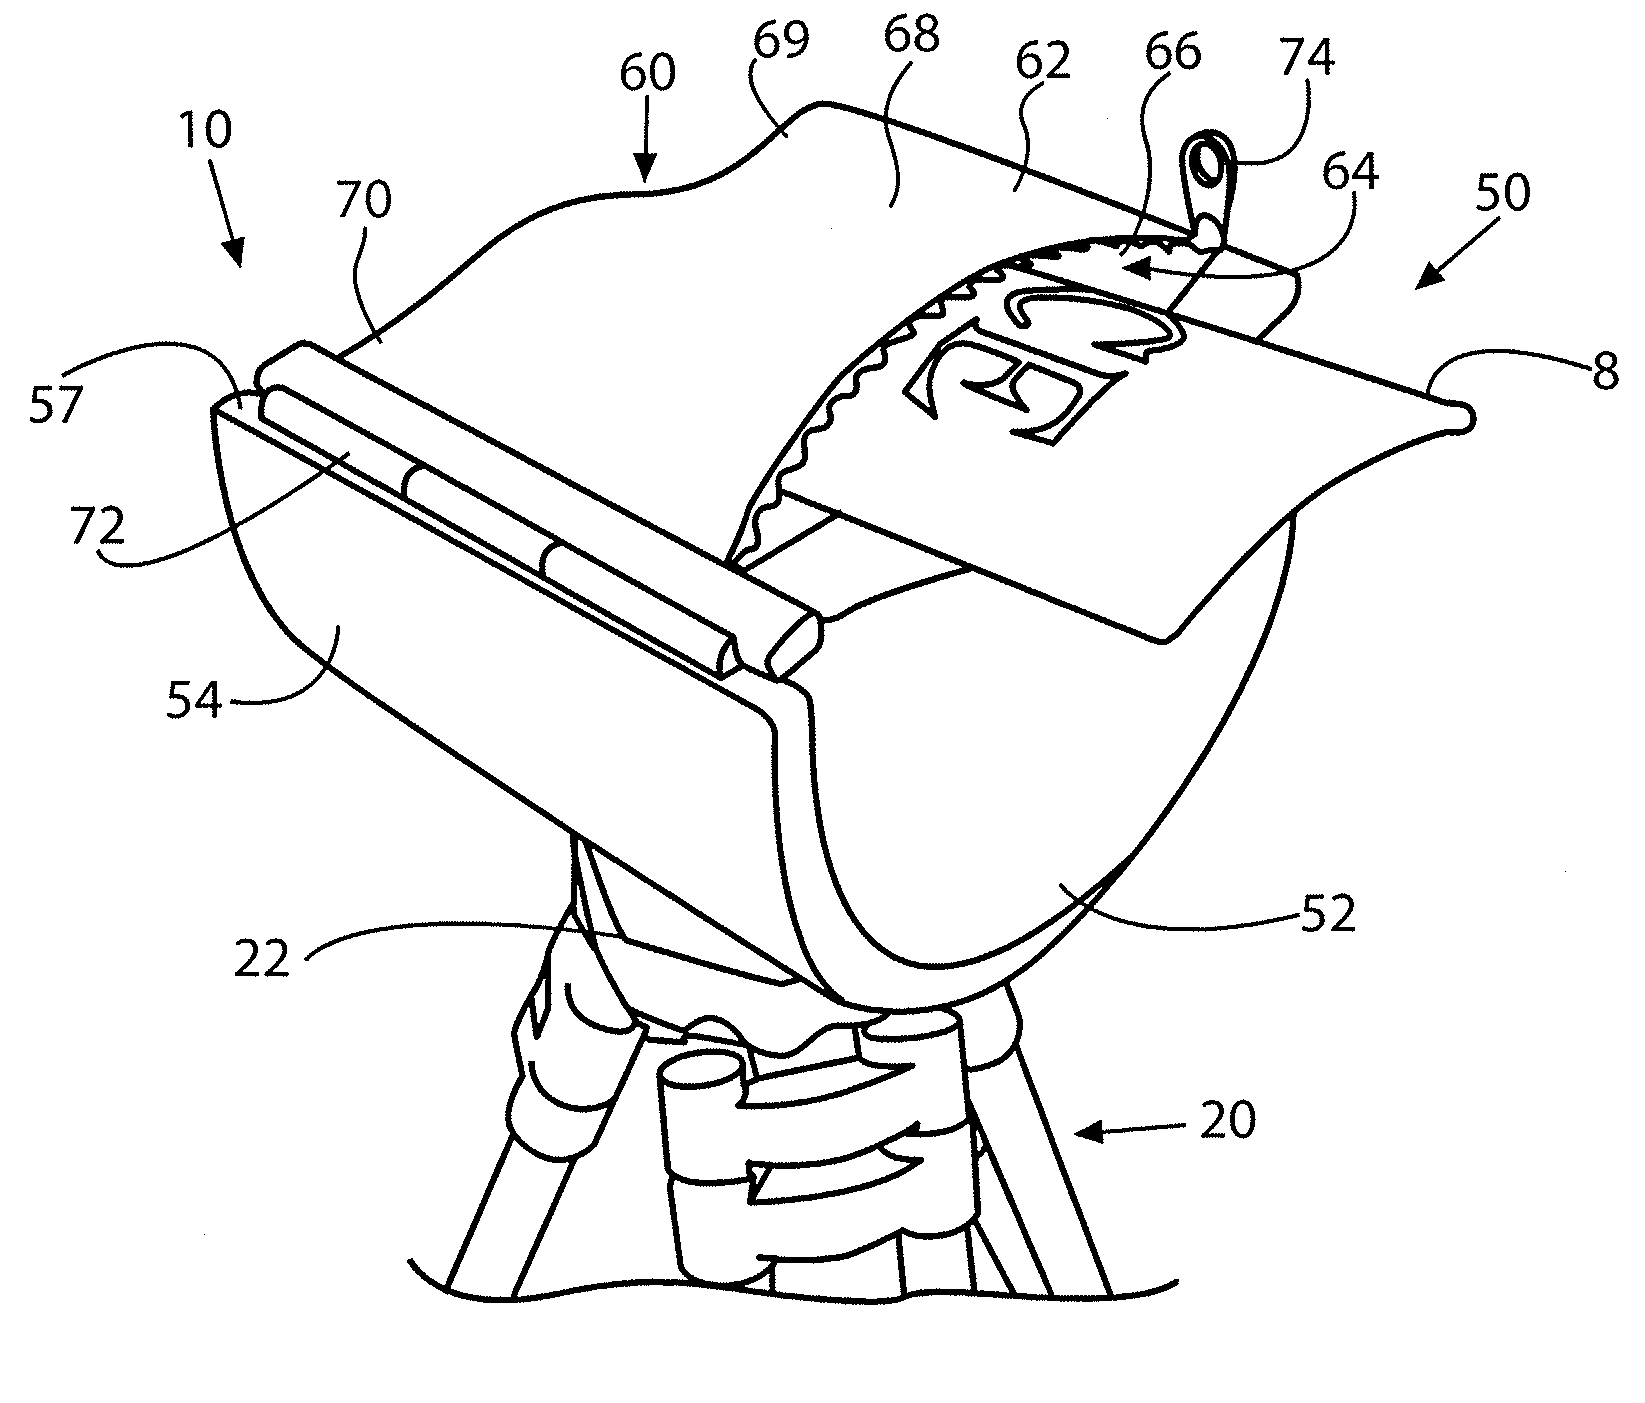 Mobile apparatus for providing cryotherapy and thermotherapy to a region of a knee being in elevated position